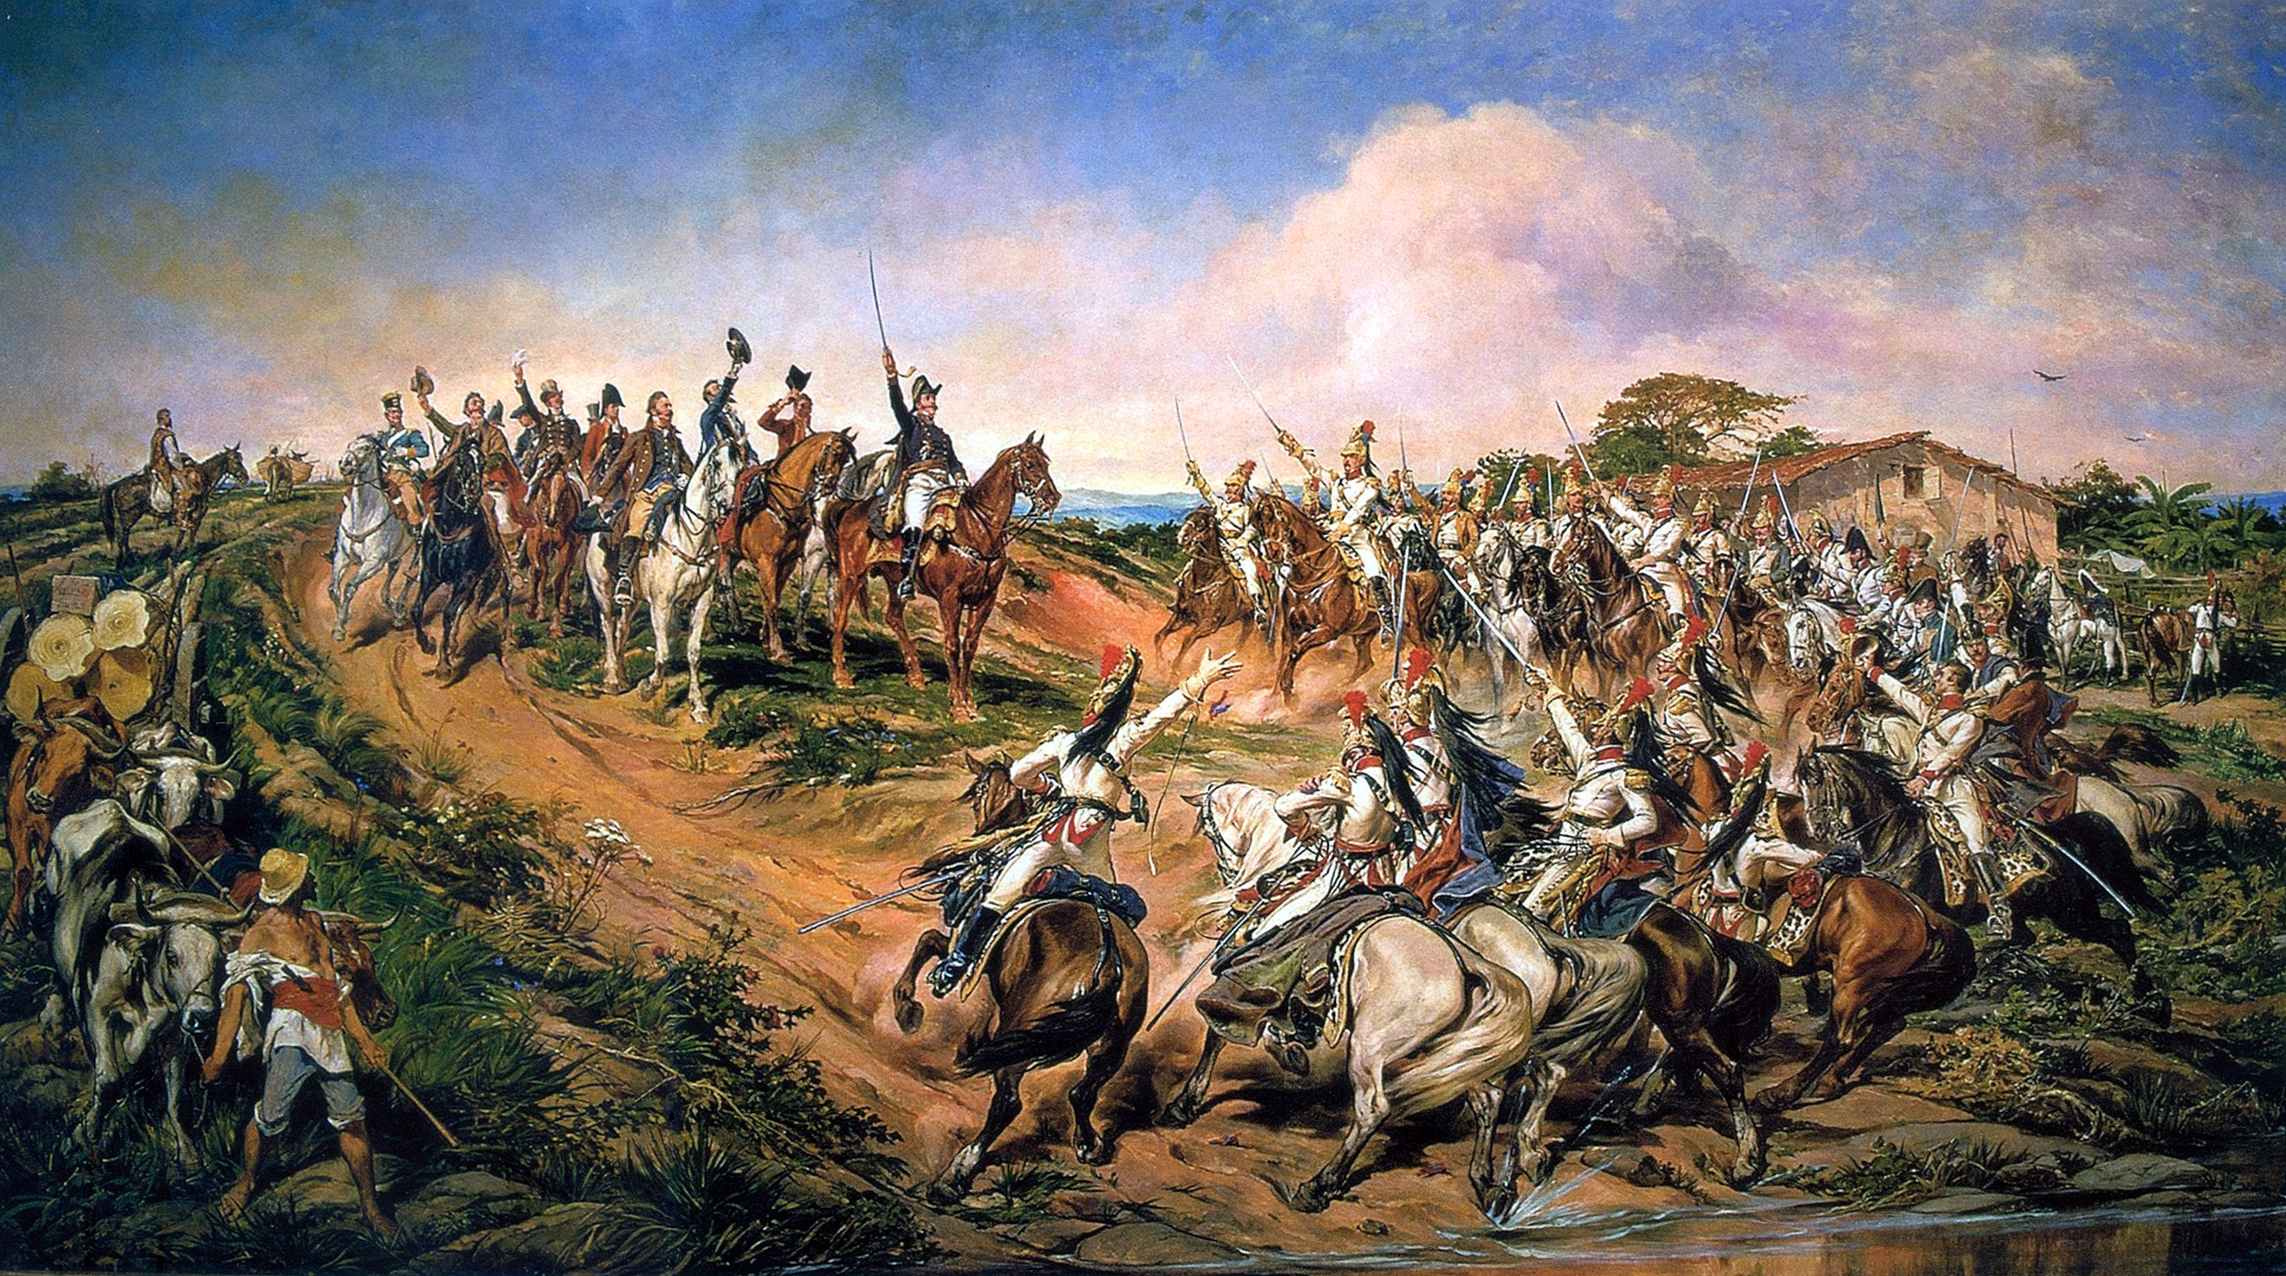 Independence or Death by Pedro Américo